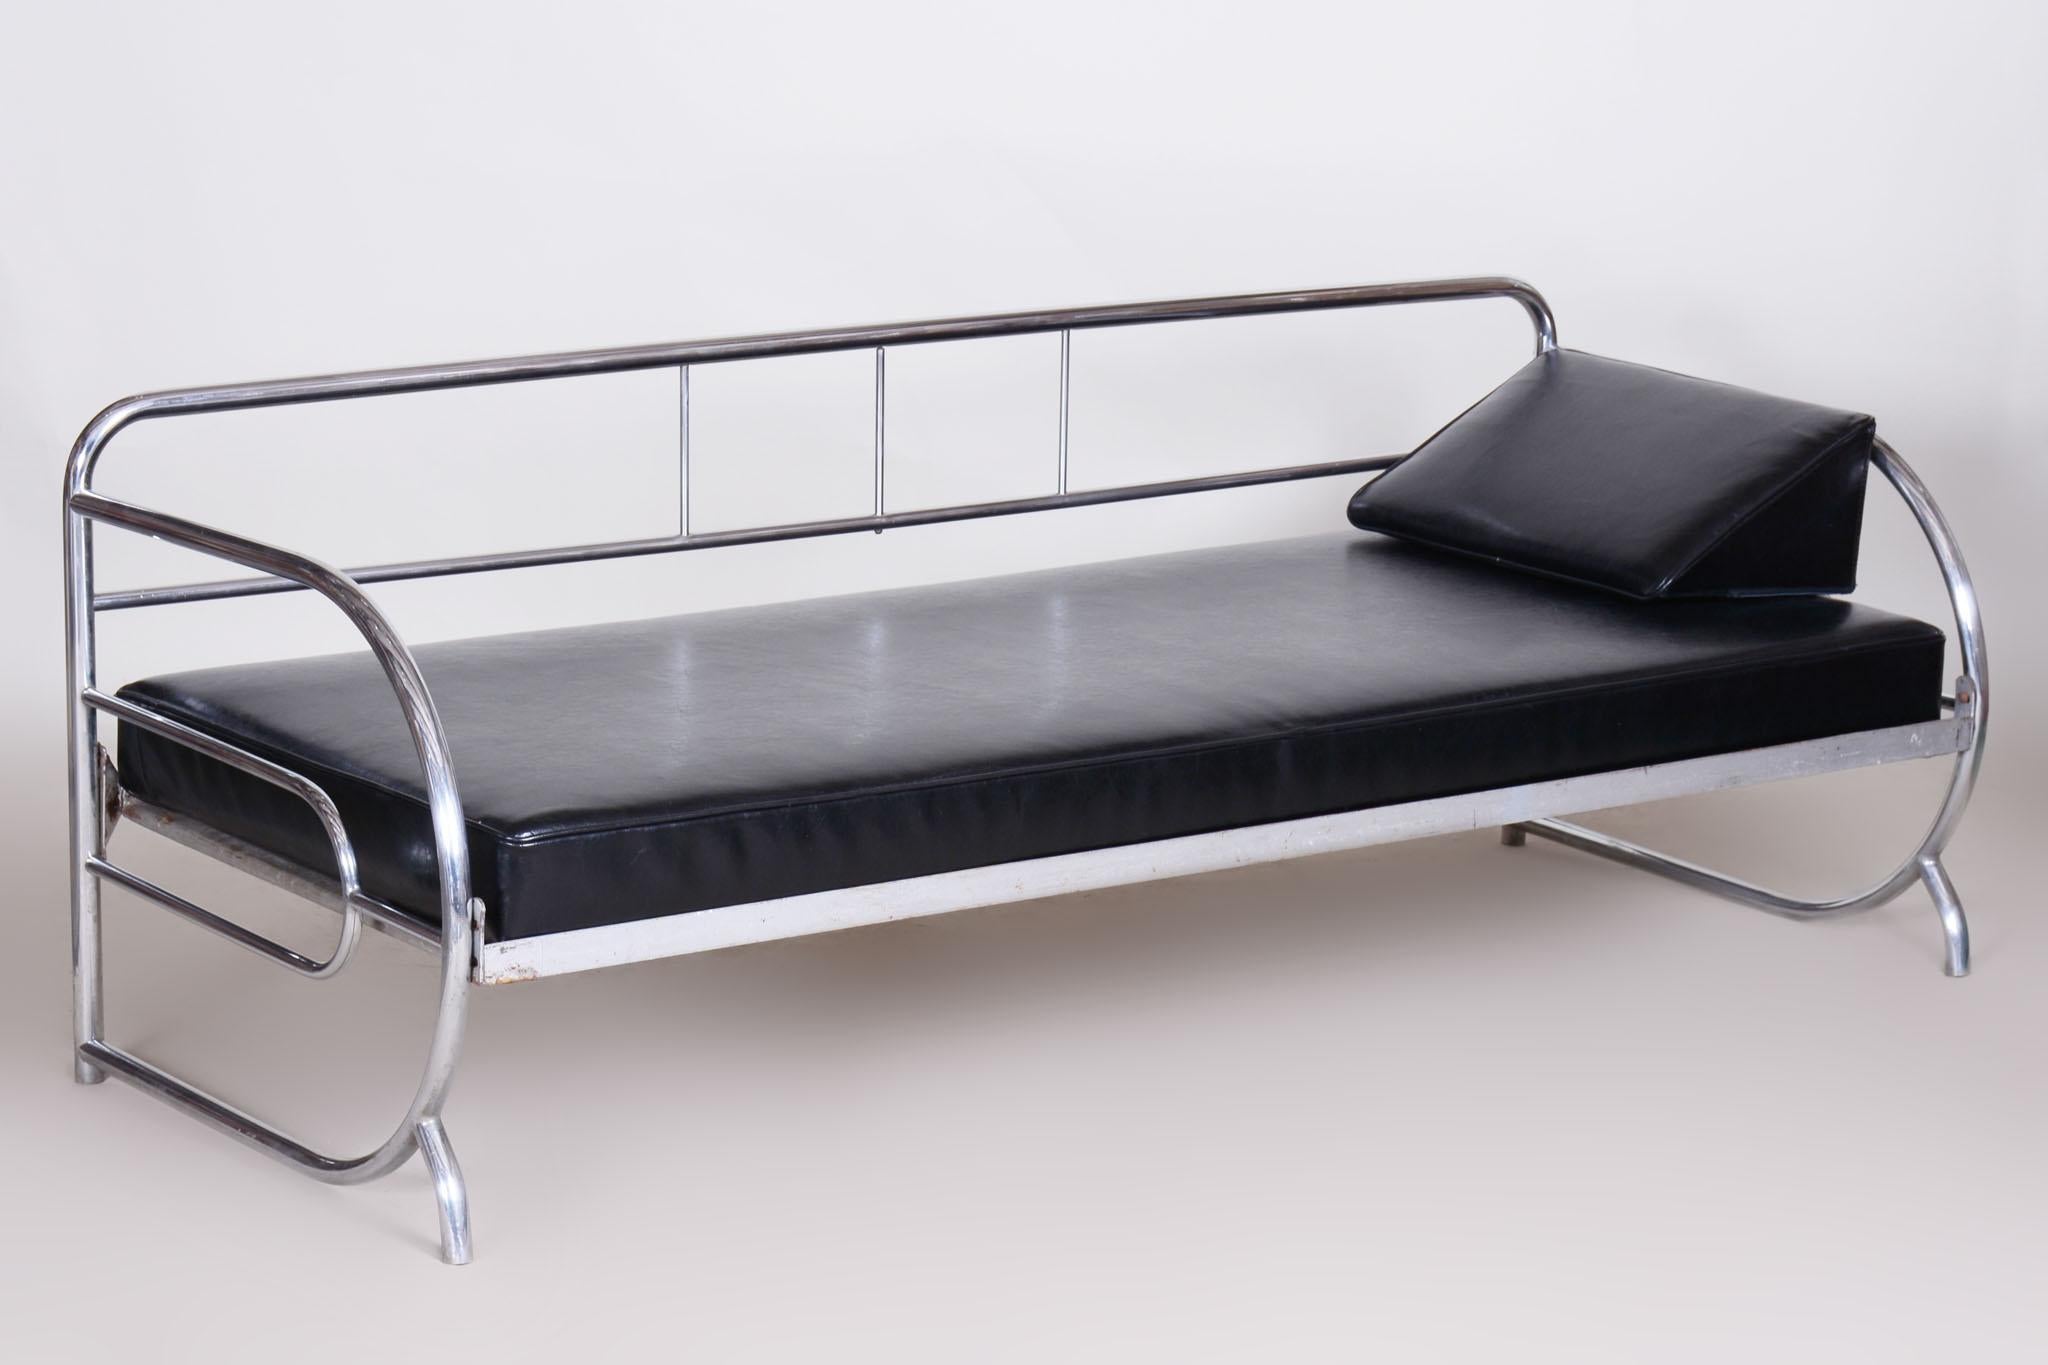 Restored black Bauhaus sofa by Robert Slezak.

Source: Czechia (Czechoslovakia)
Period: 1930-1939
Number of Seats: 3
Material: Chrome-Plated Steel, High-Quality Leather

Designed by renowned Czech designer Robert Slezak. 

It has been fully